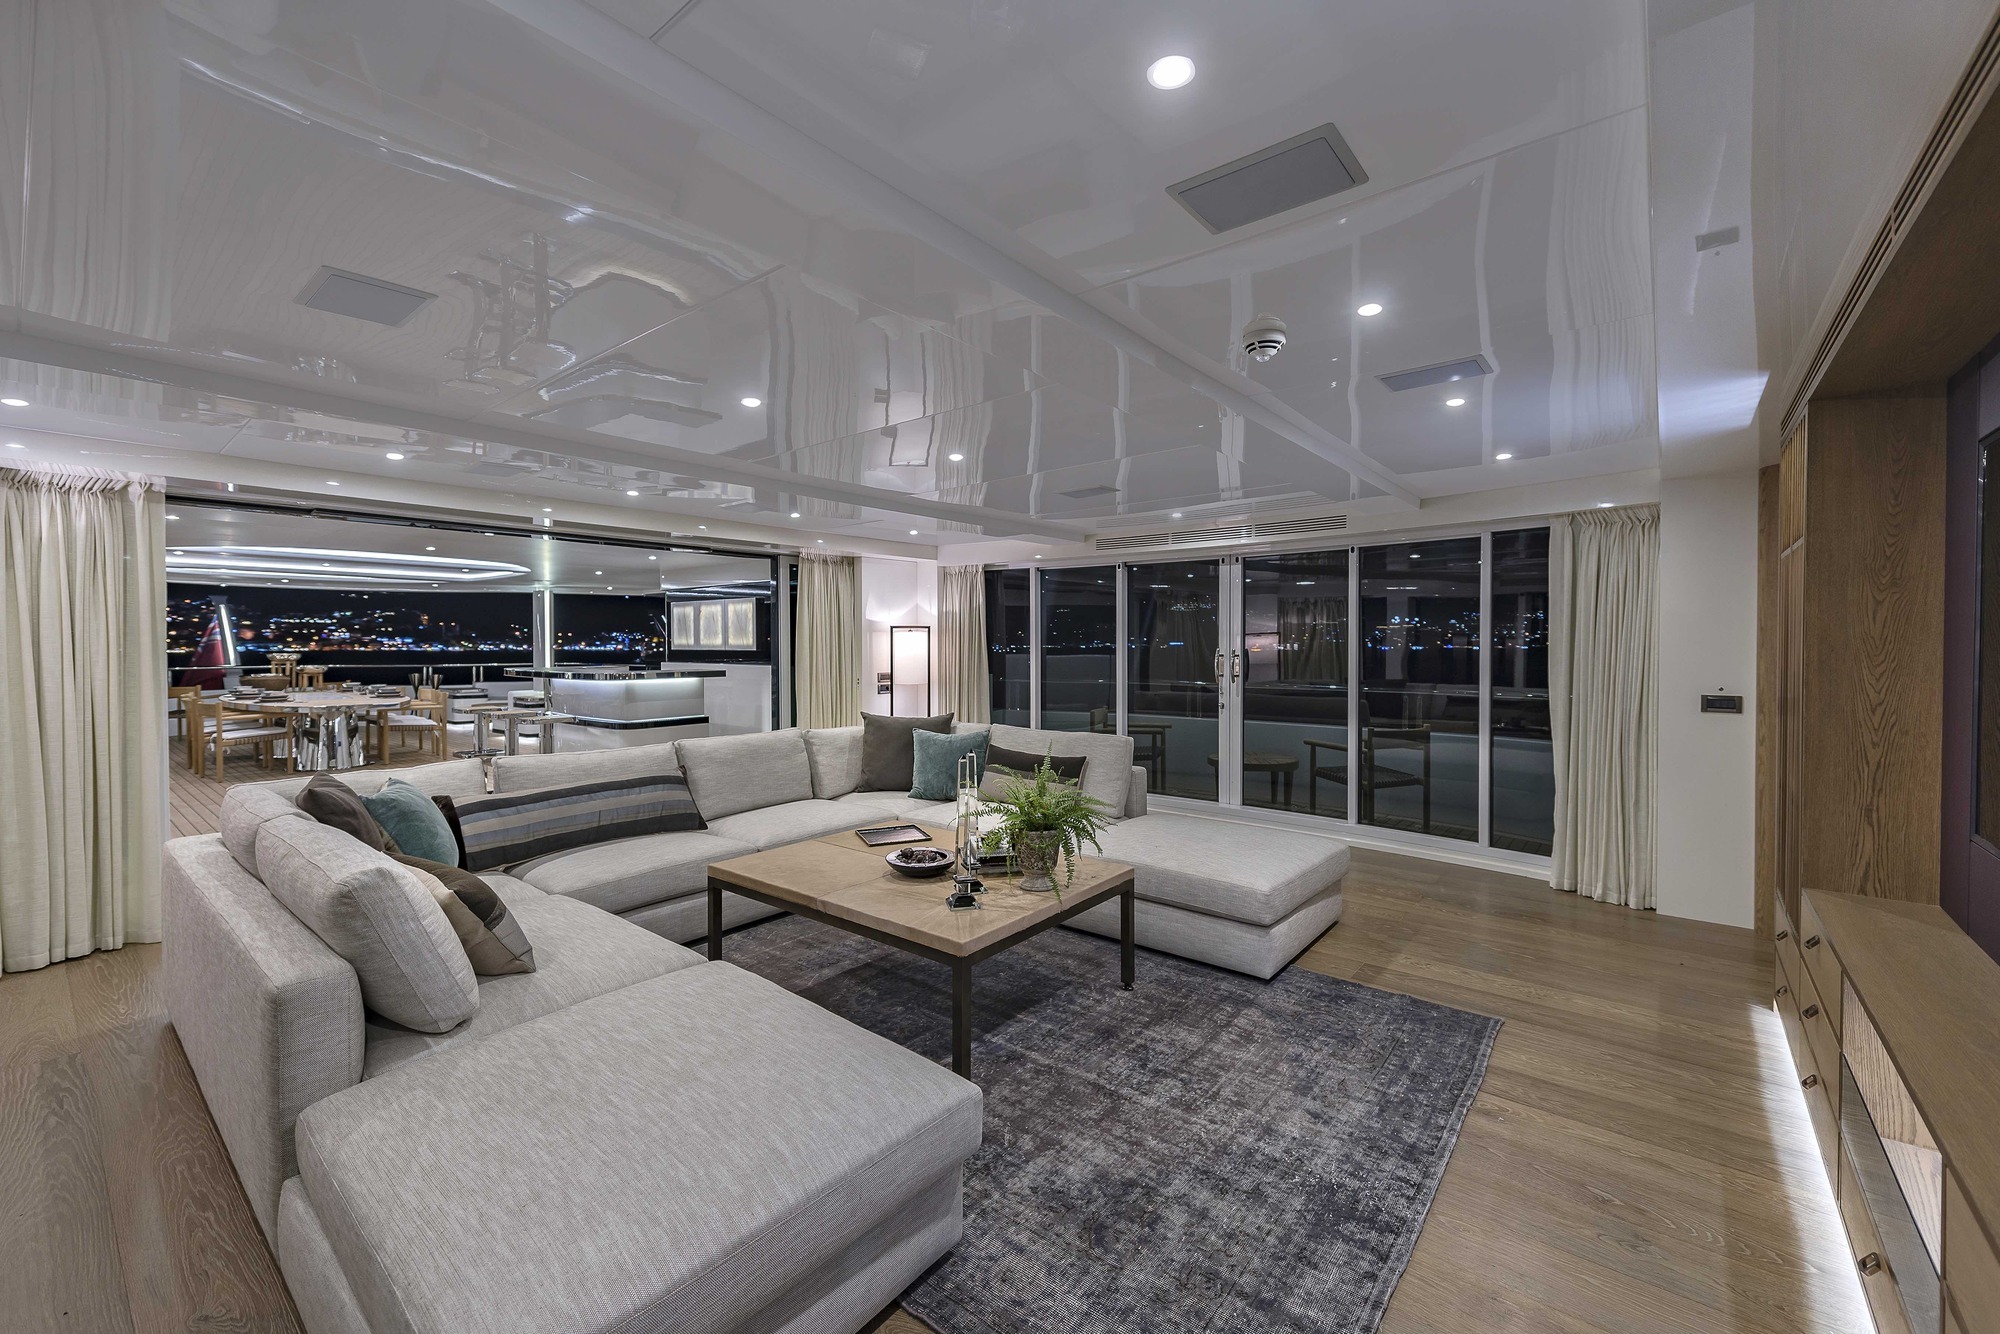 Motor Yacht LIQUID SKY By CMB Yachts - Looking Out Onto The Aft Deck